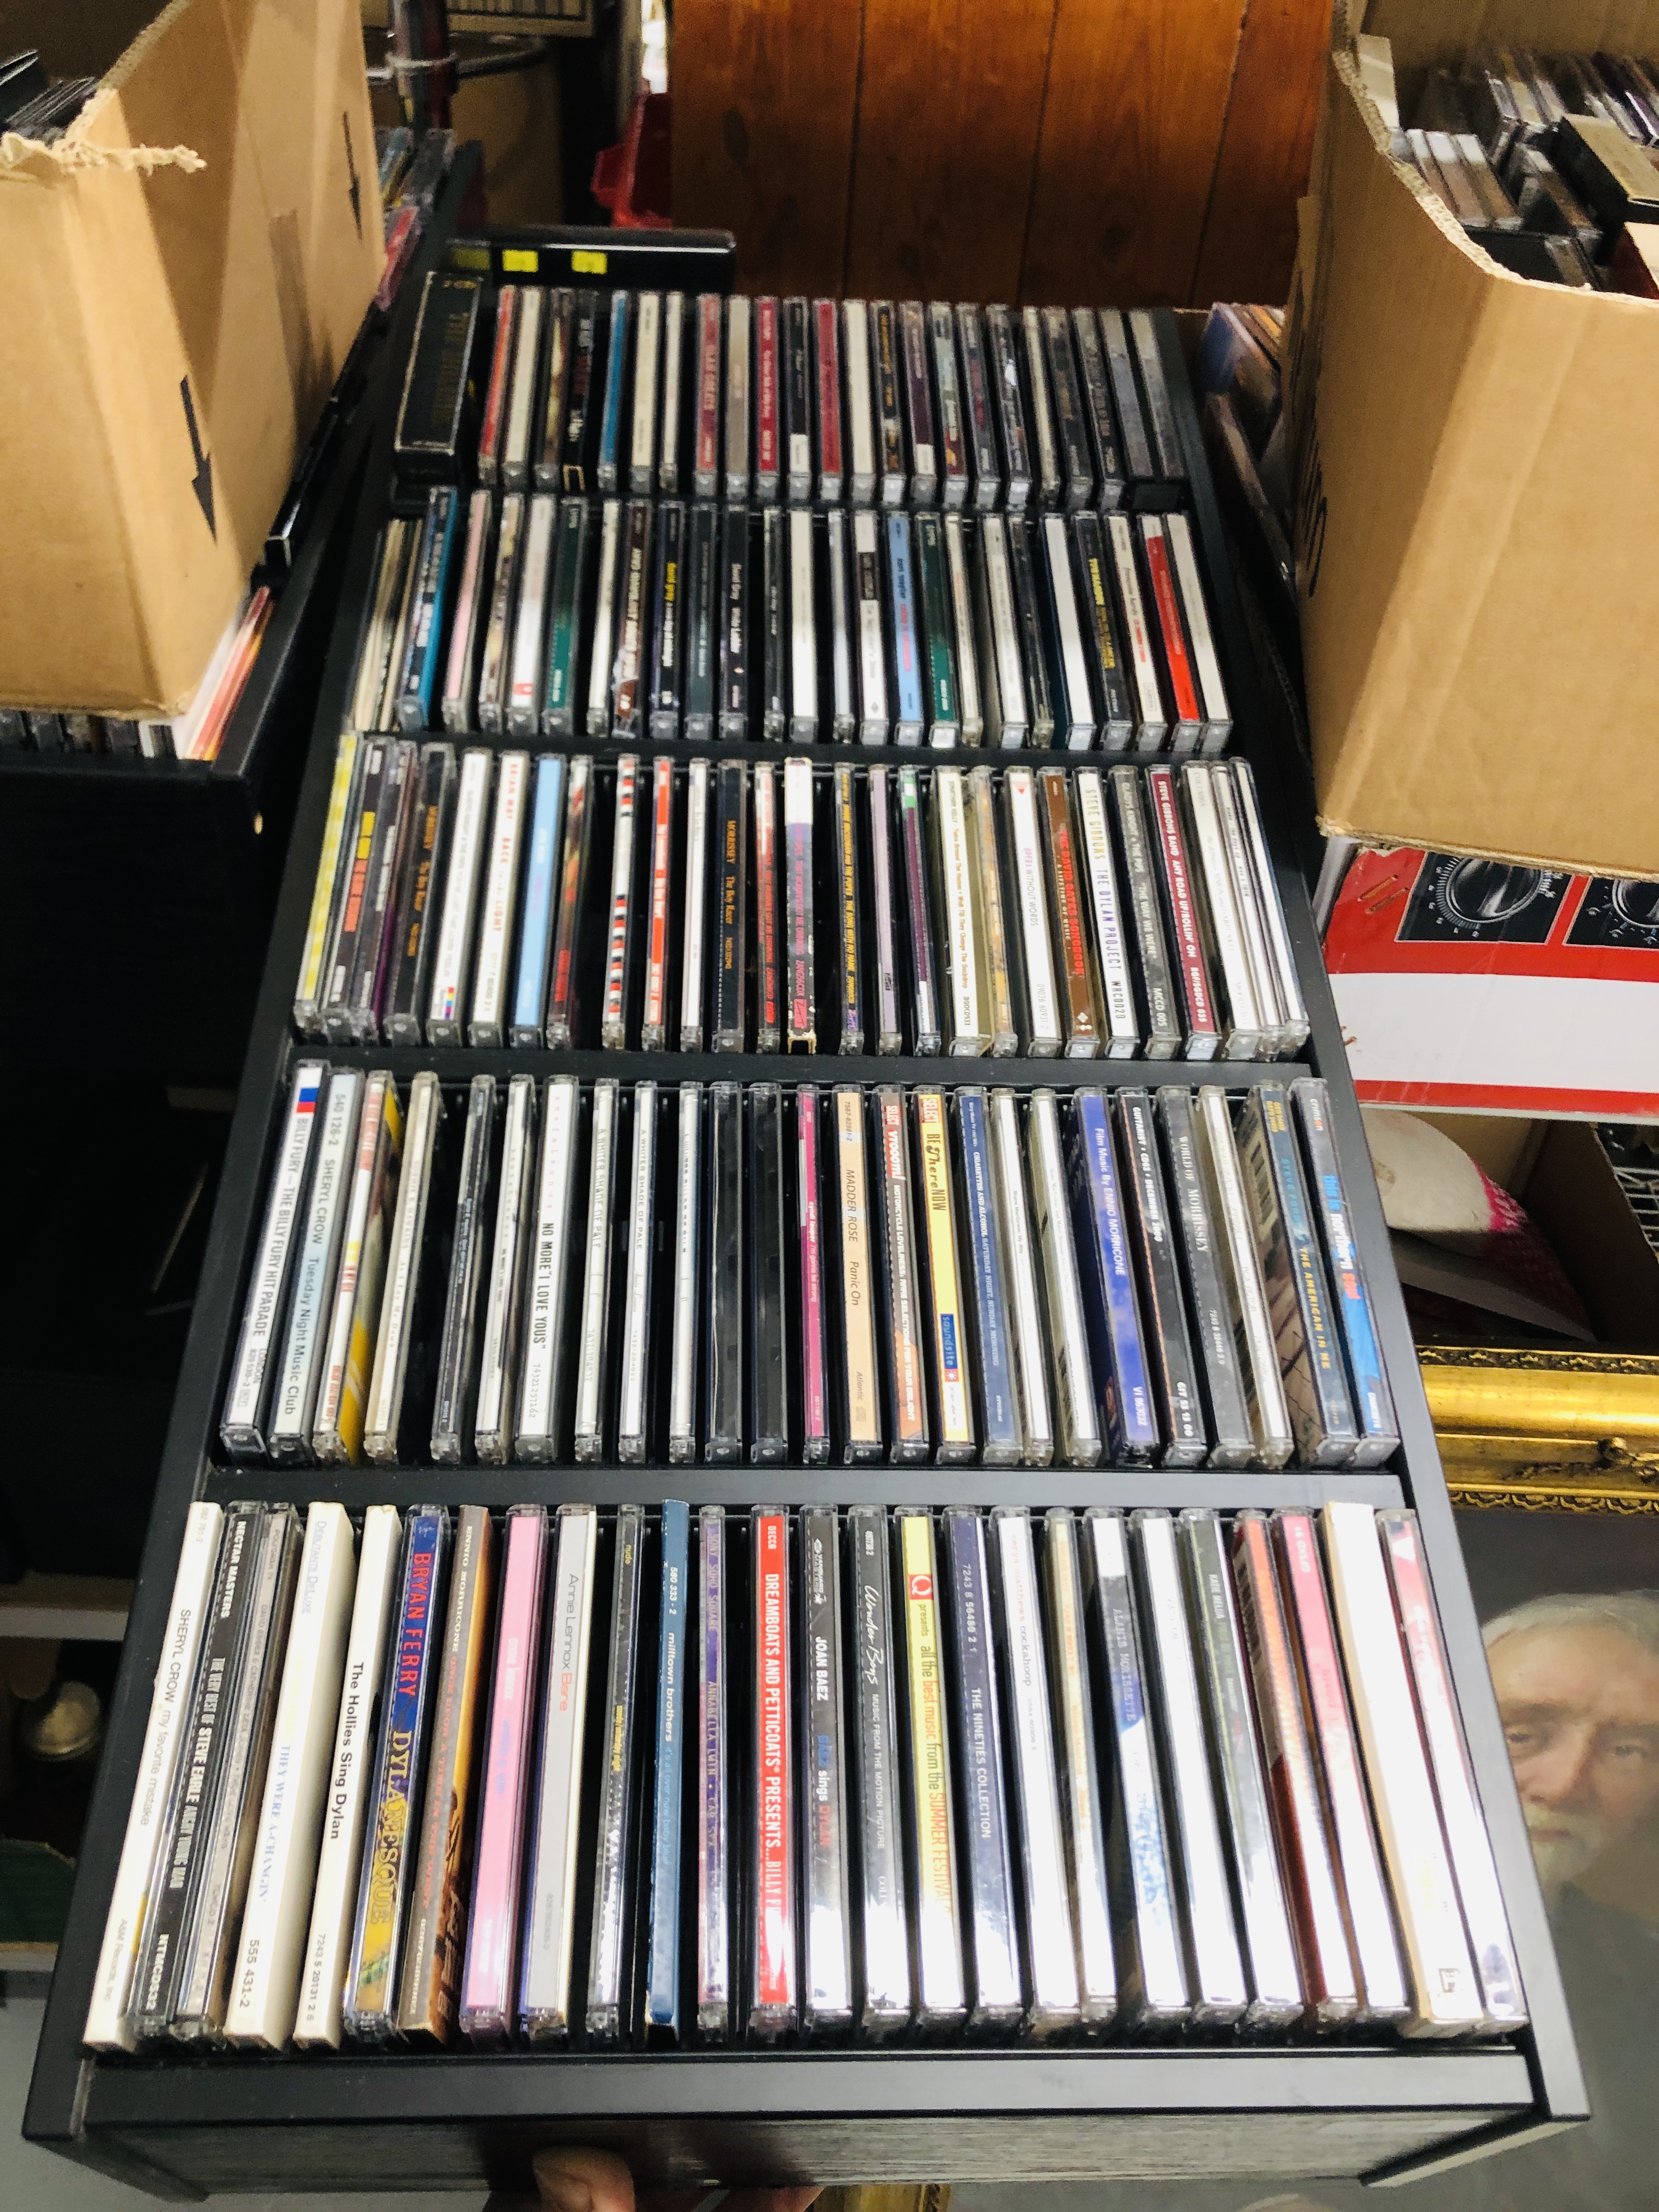 5 BOXES CONTAINING A COLLECTION OF APPROX 440 POPULAR MUSIC CD'S - Image 3 of 6